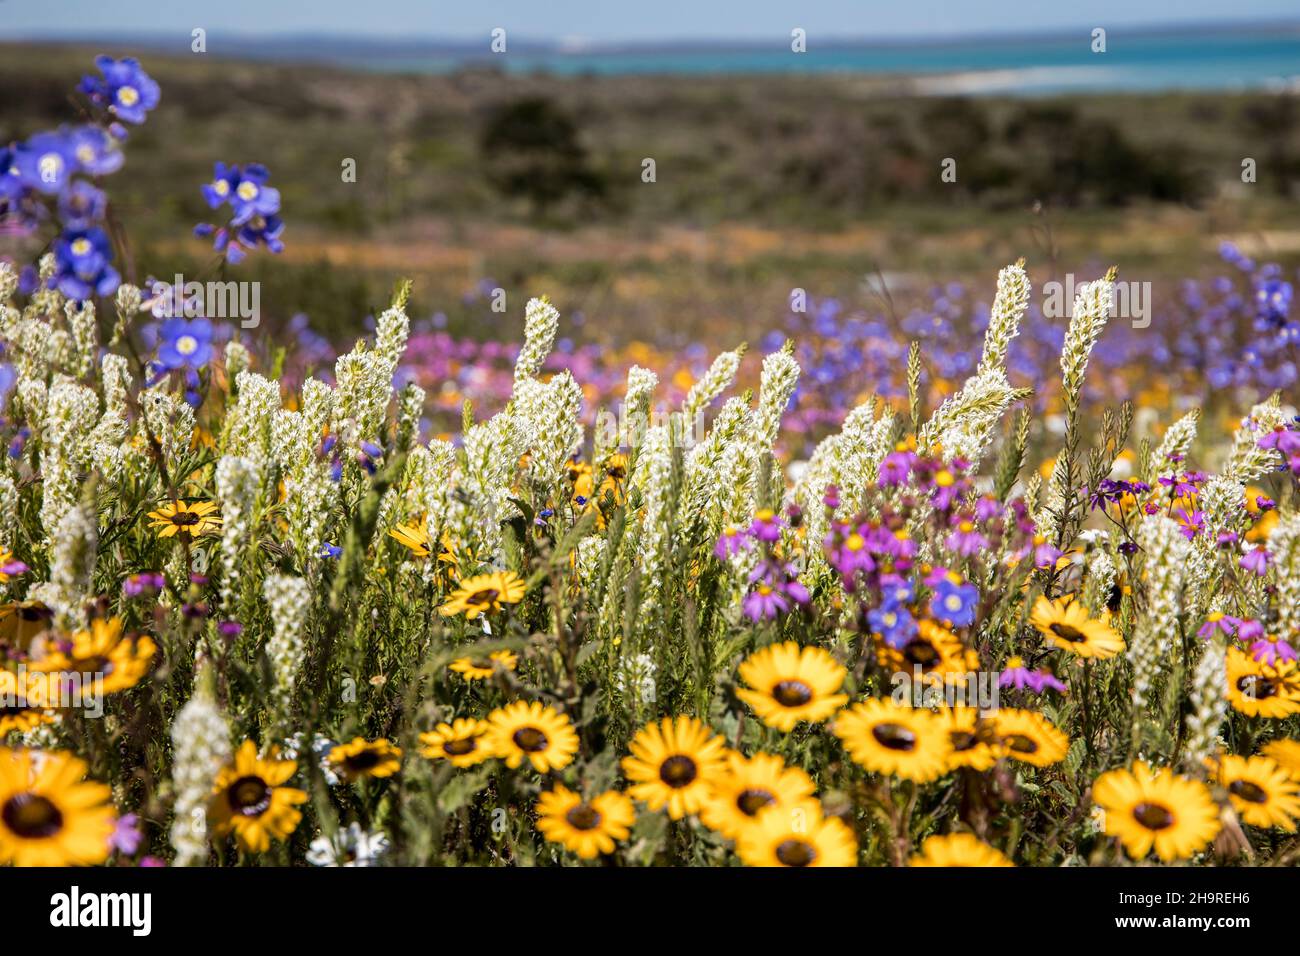 A beautiful mix of wild-growing flowers with many colors in a field Stock Photo